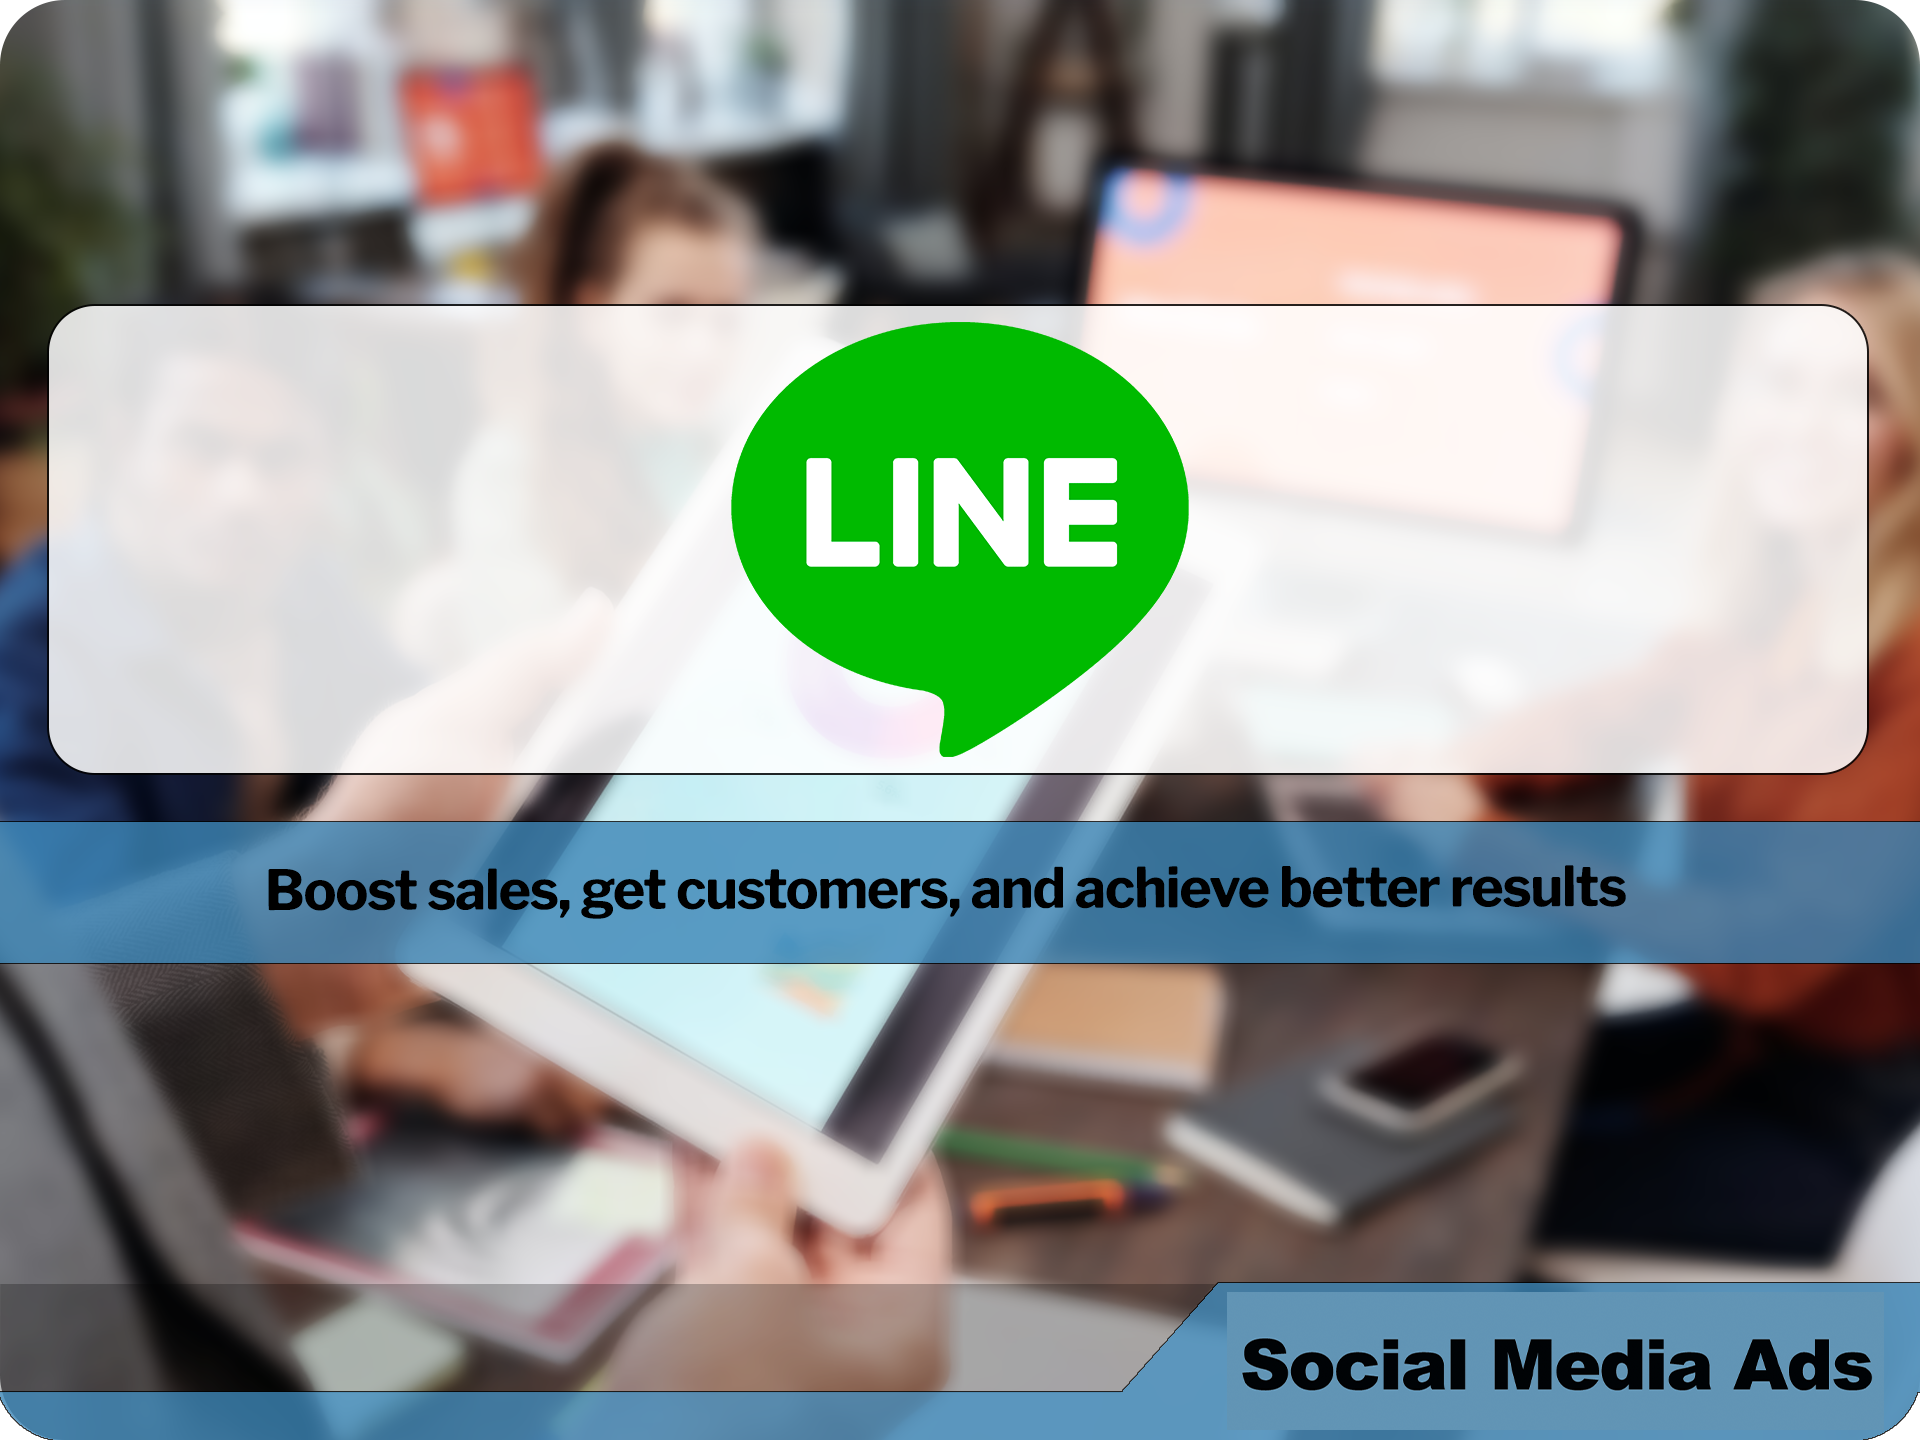 Go on LINE. 4 features of LINE advertising